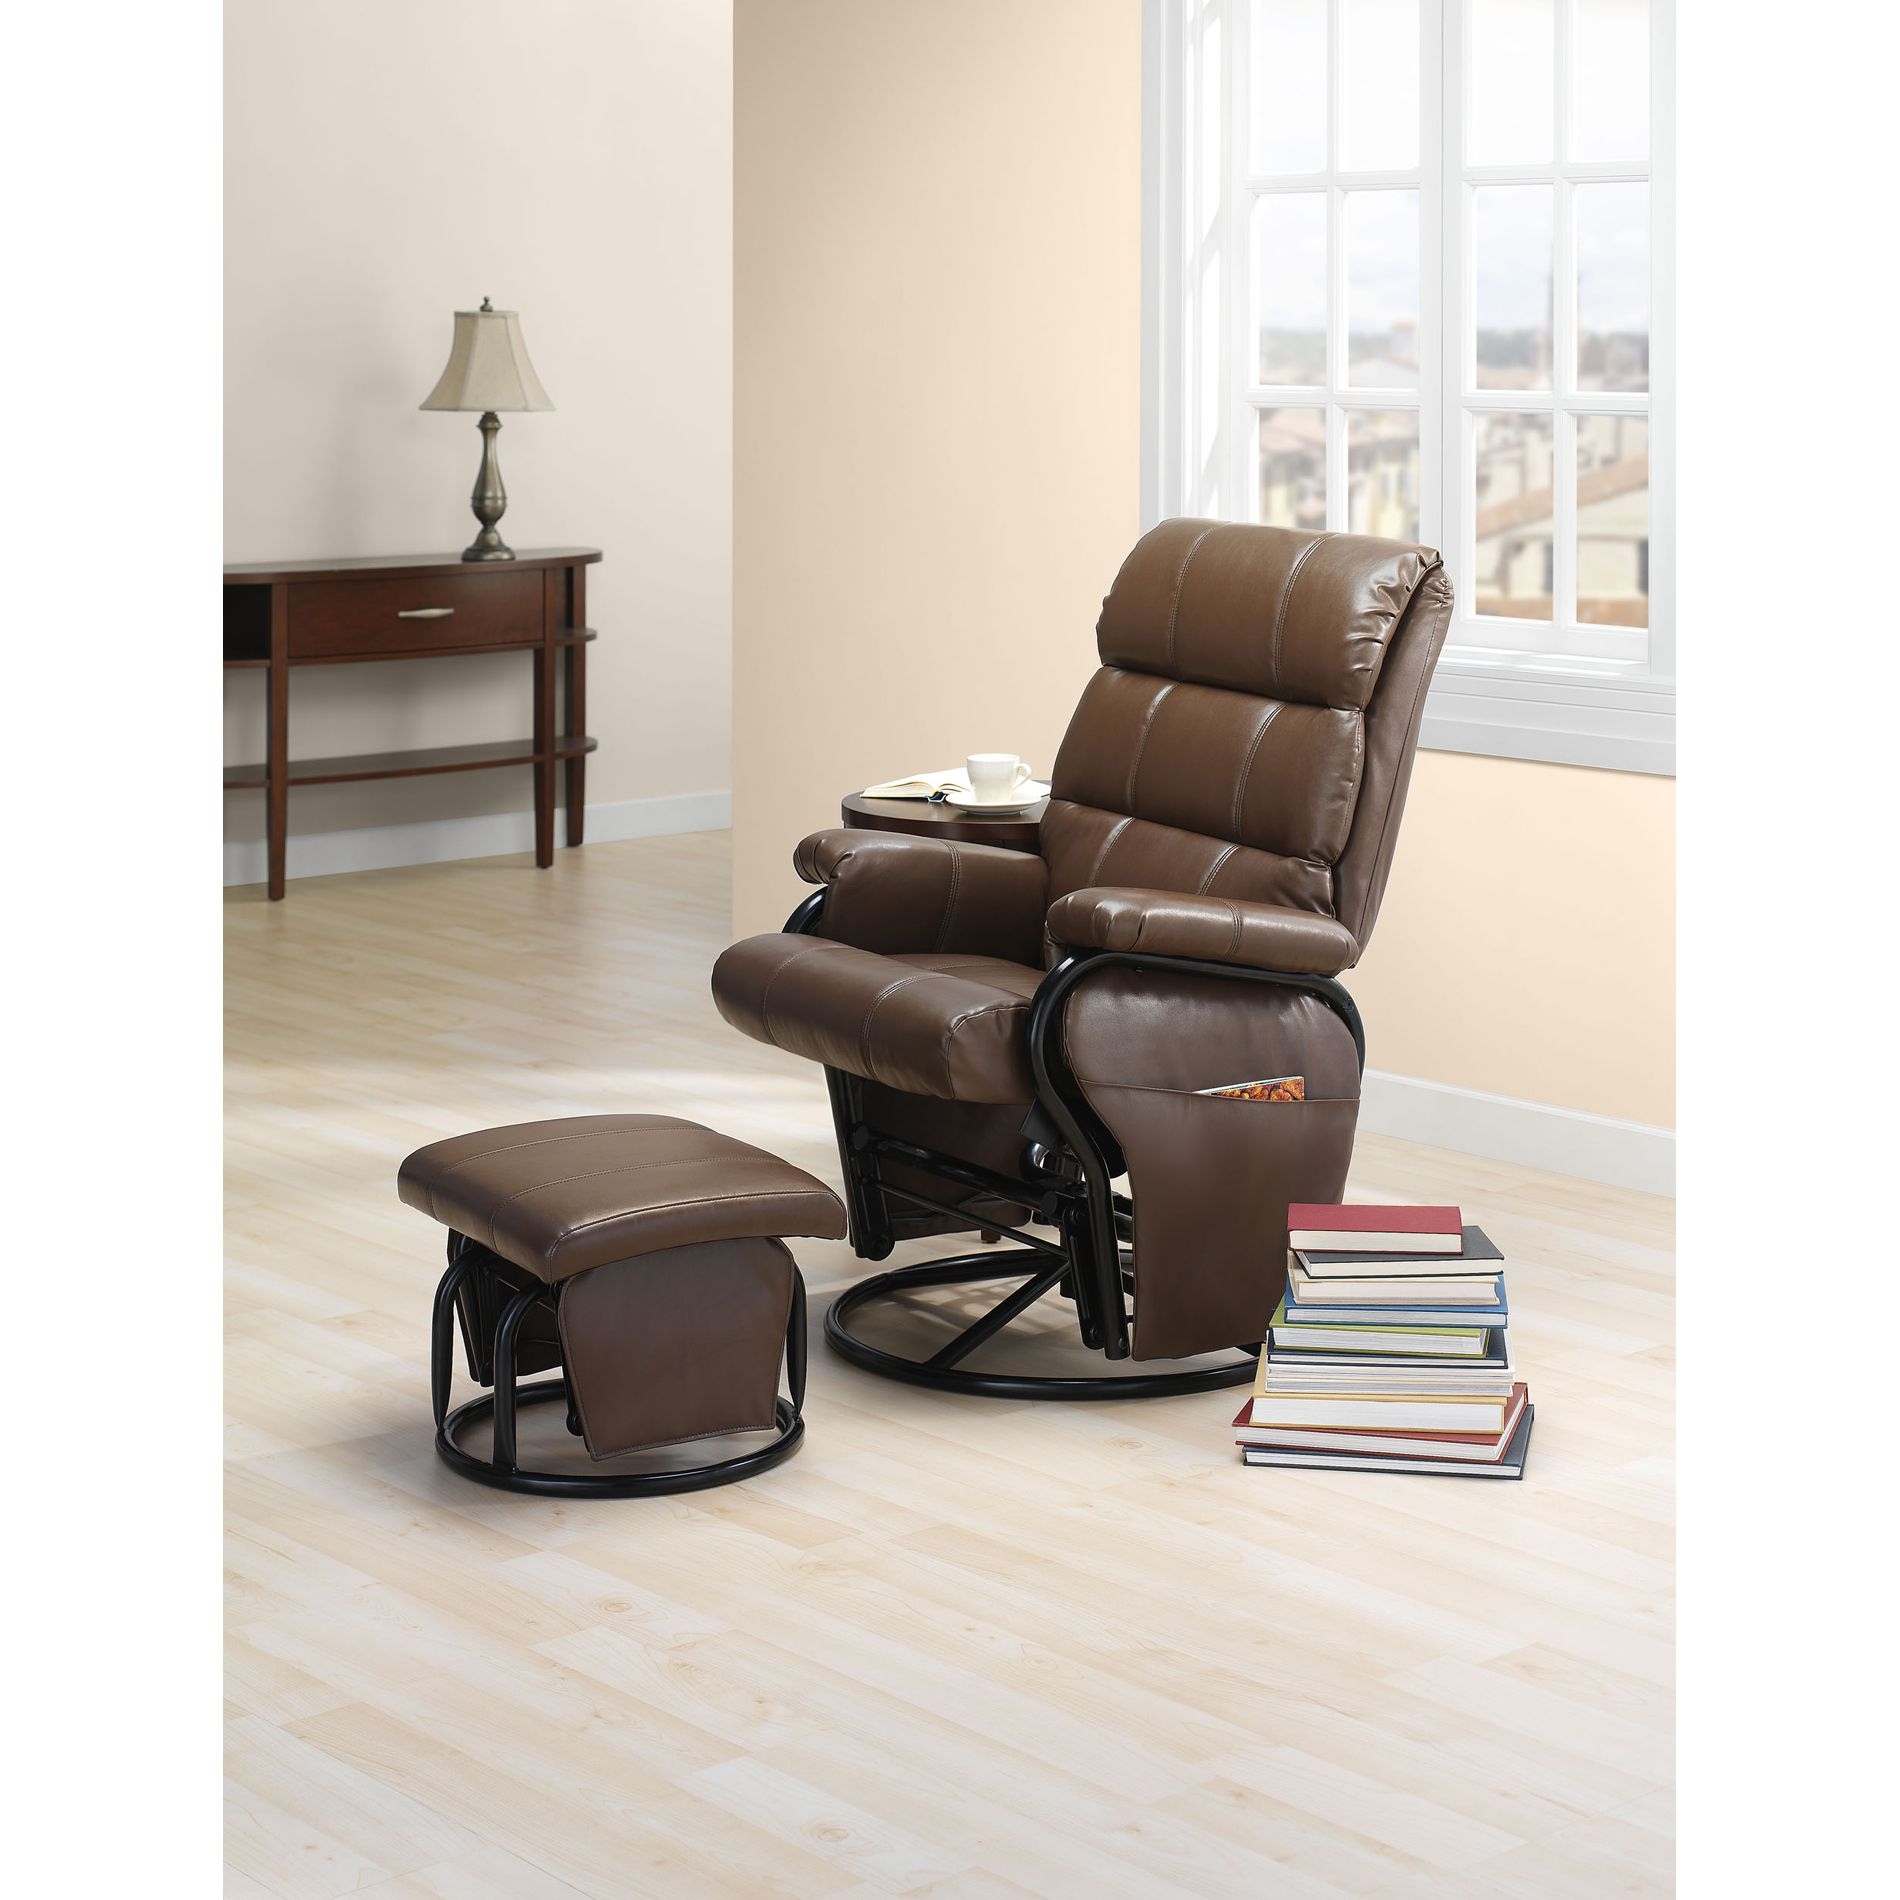 Swivel Glider Ottoman Recline Furniture Leather Chair Set Pocket Room Office Sup